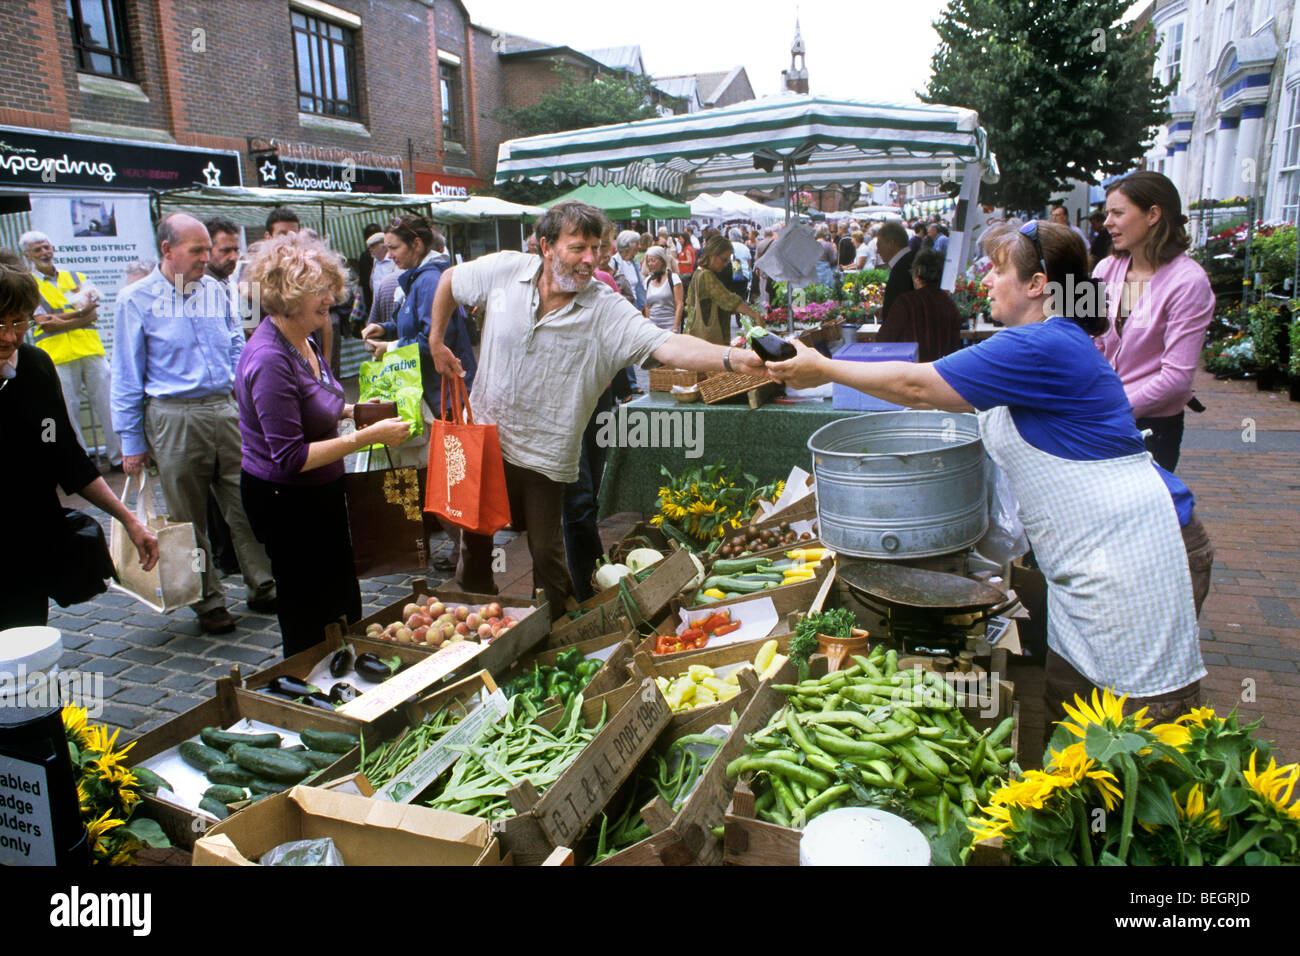 Buying an aubergine at a vegetable stall at Lewes farmers' market, Lewes, East Sussex. Stock Photo